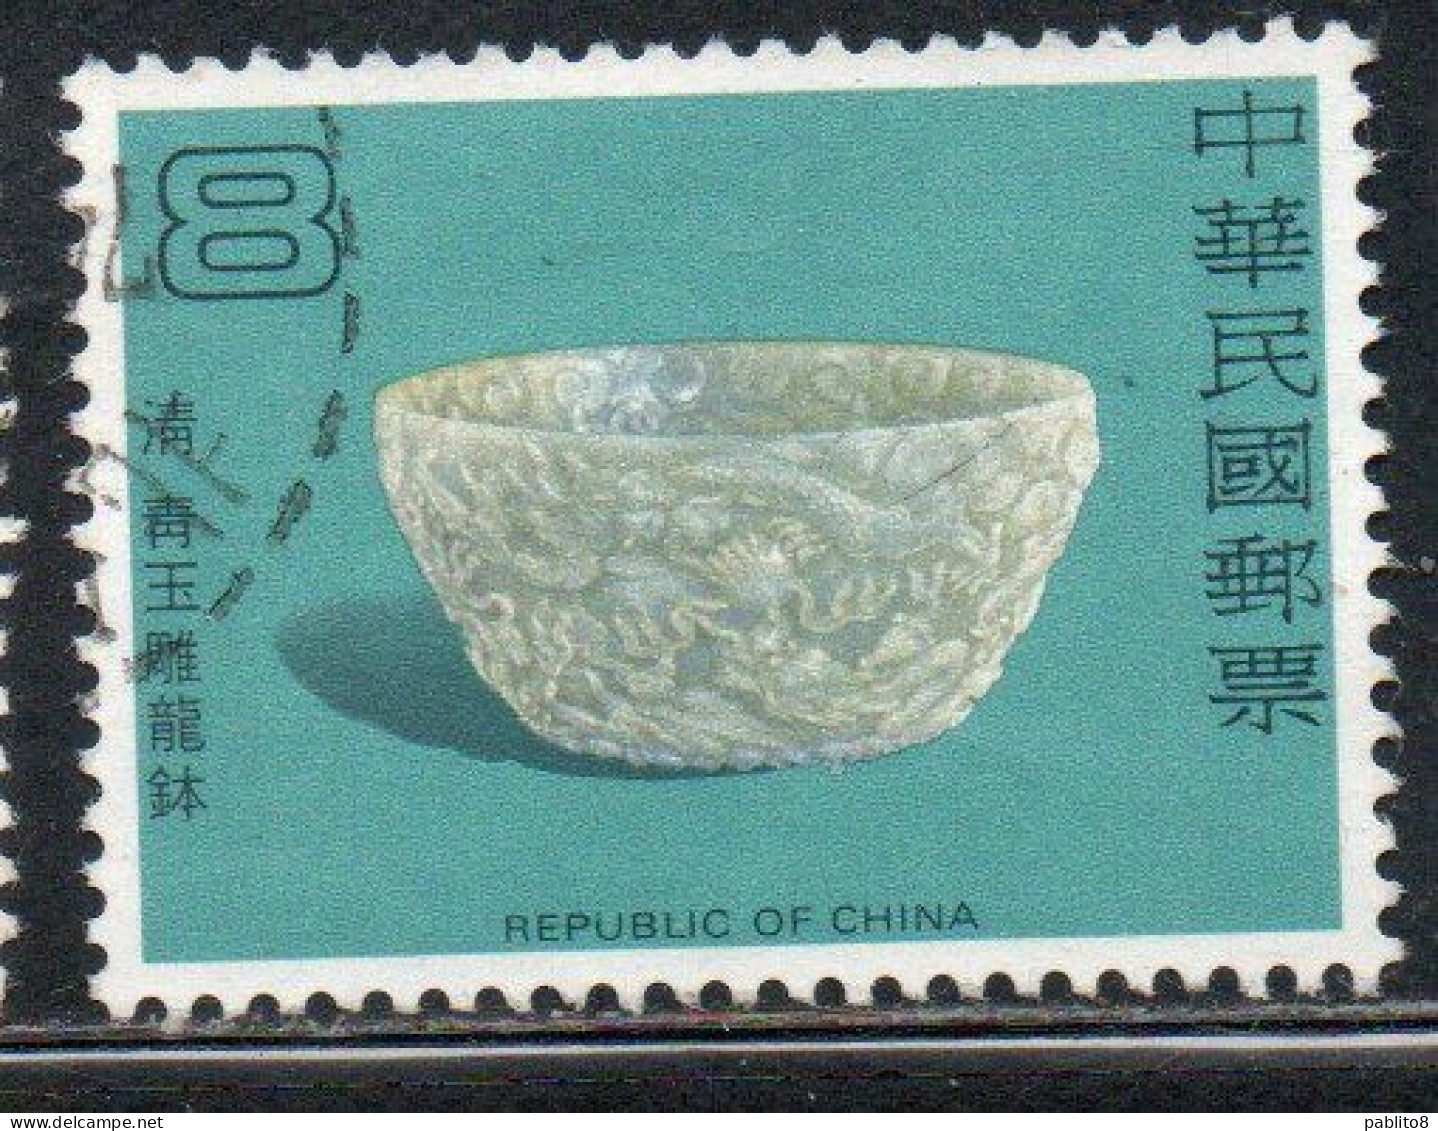 CHINA REPUBLIC CINA TAIWAN FORMOSA 1980 JADE POTTERY MONK'S ALMS BOWL CH'ING DYNASTY 8$ USED USATO OBLITERE' - Gebruikt